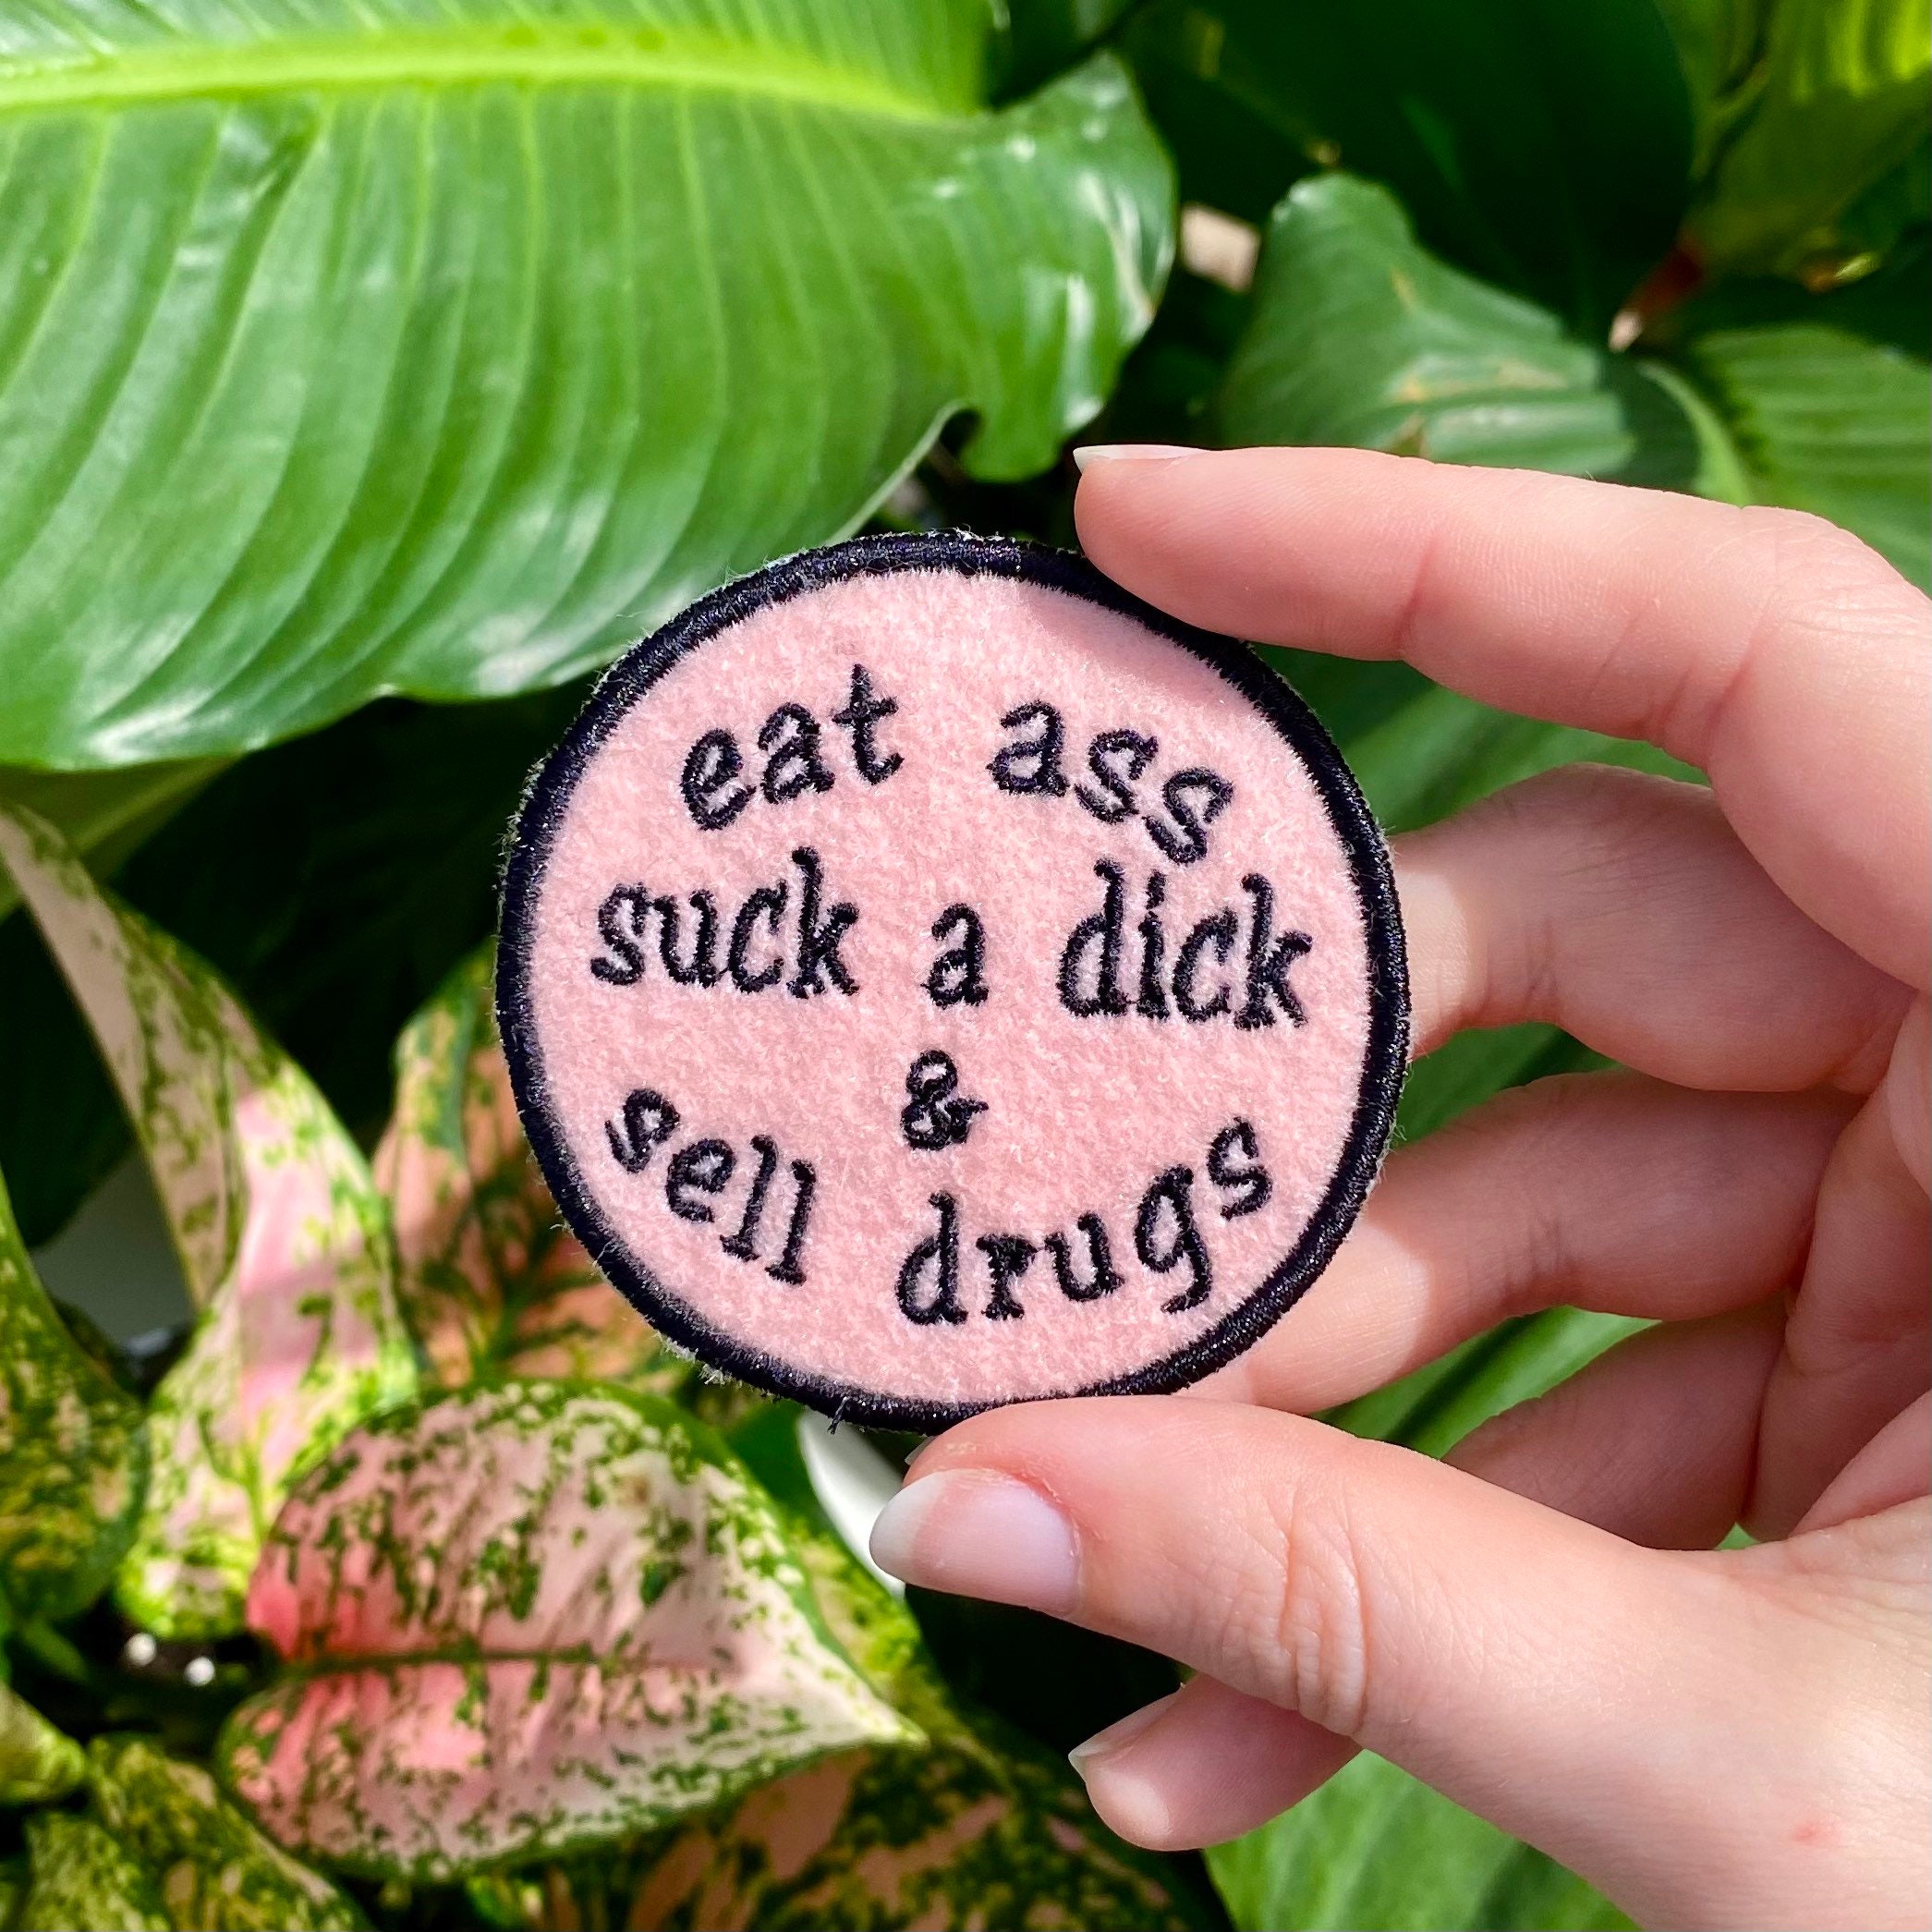 Eat ass suck a dick and sell drugs john mullany